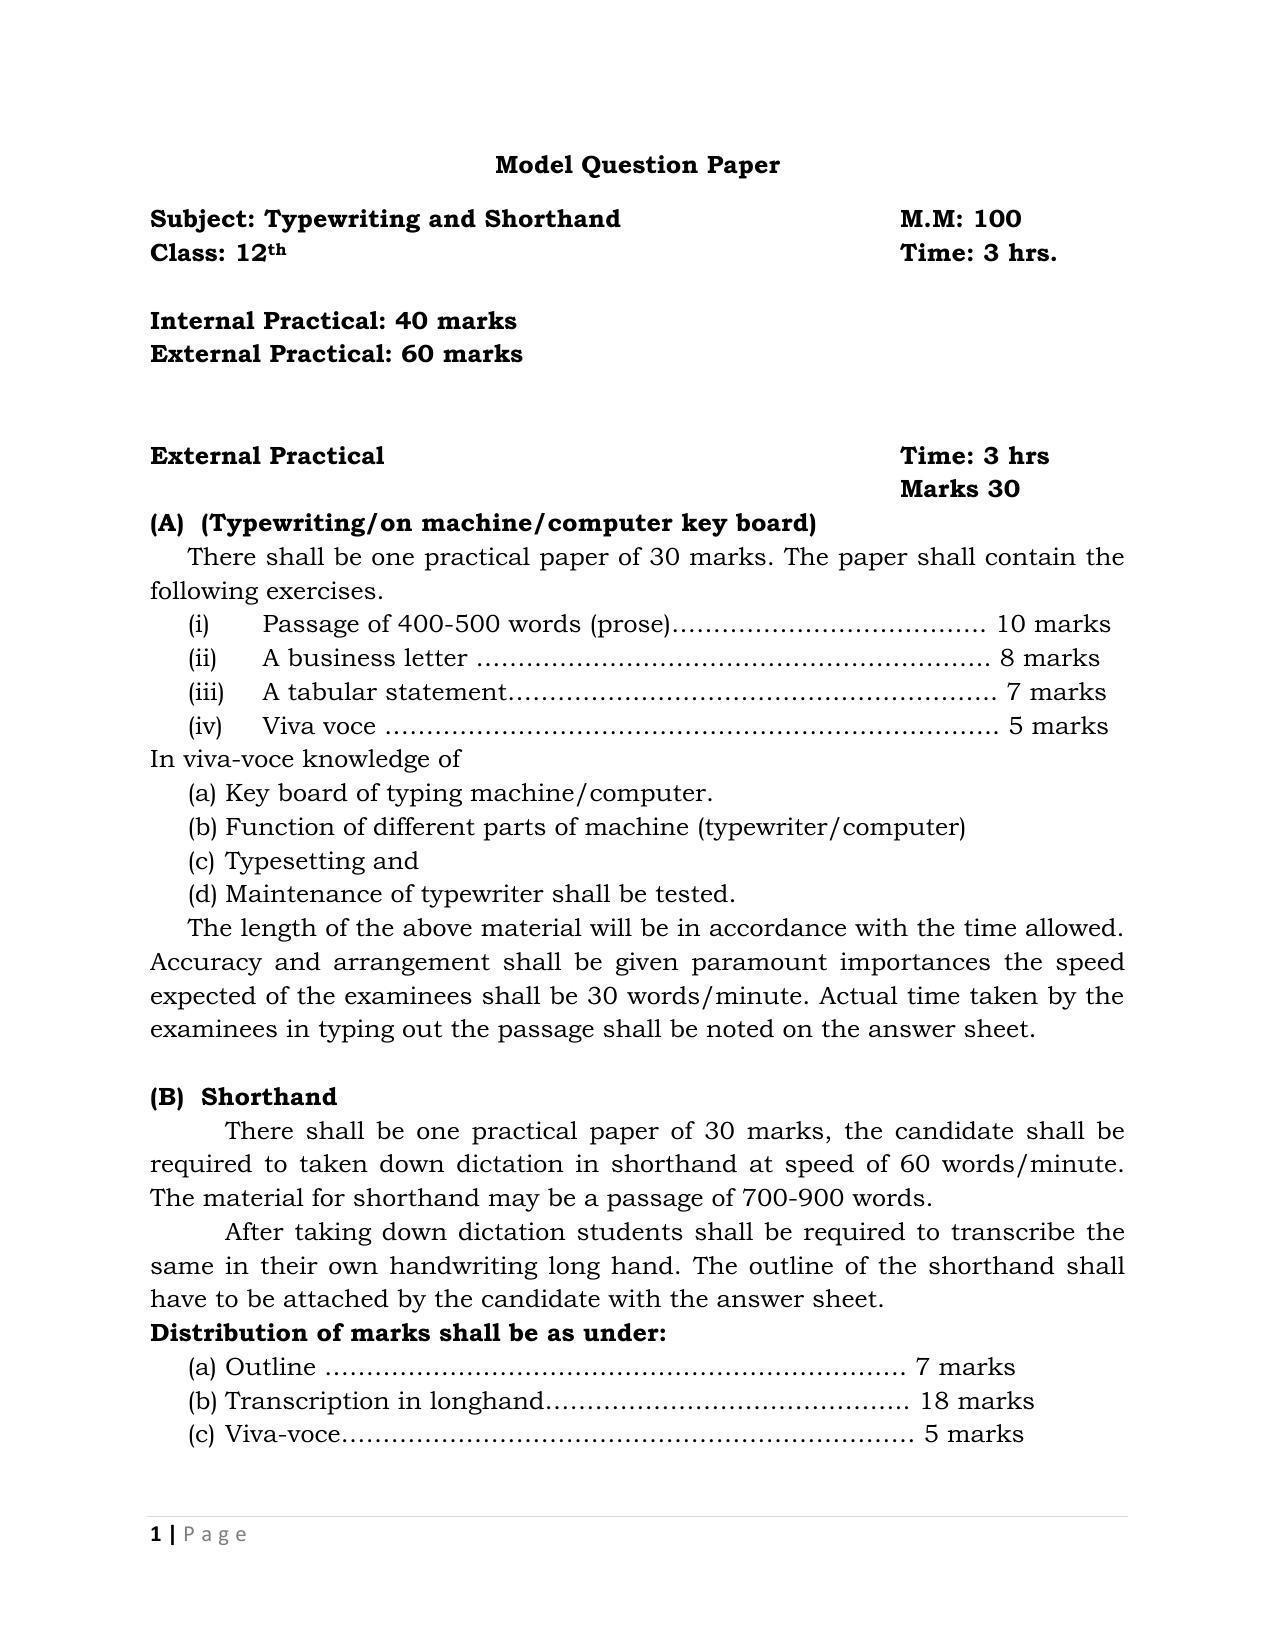 JKBOSE Class 12 Type Writing And Shorthand Model Question Paper 2023 - Page 1